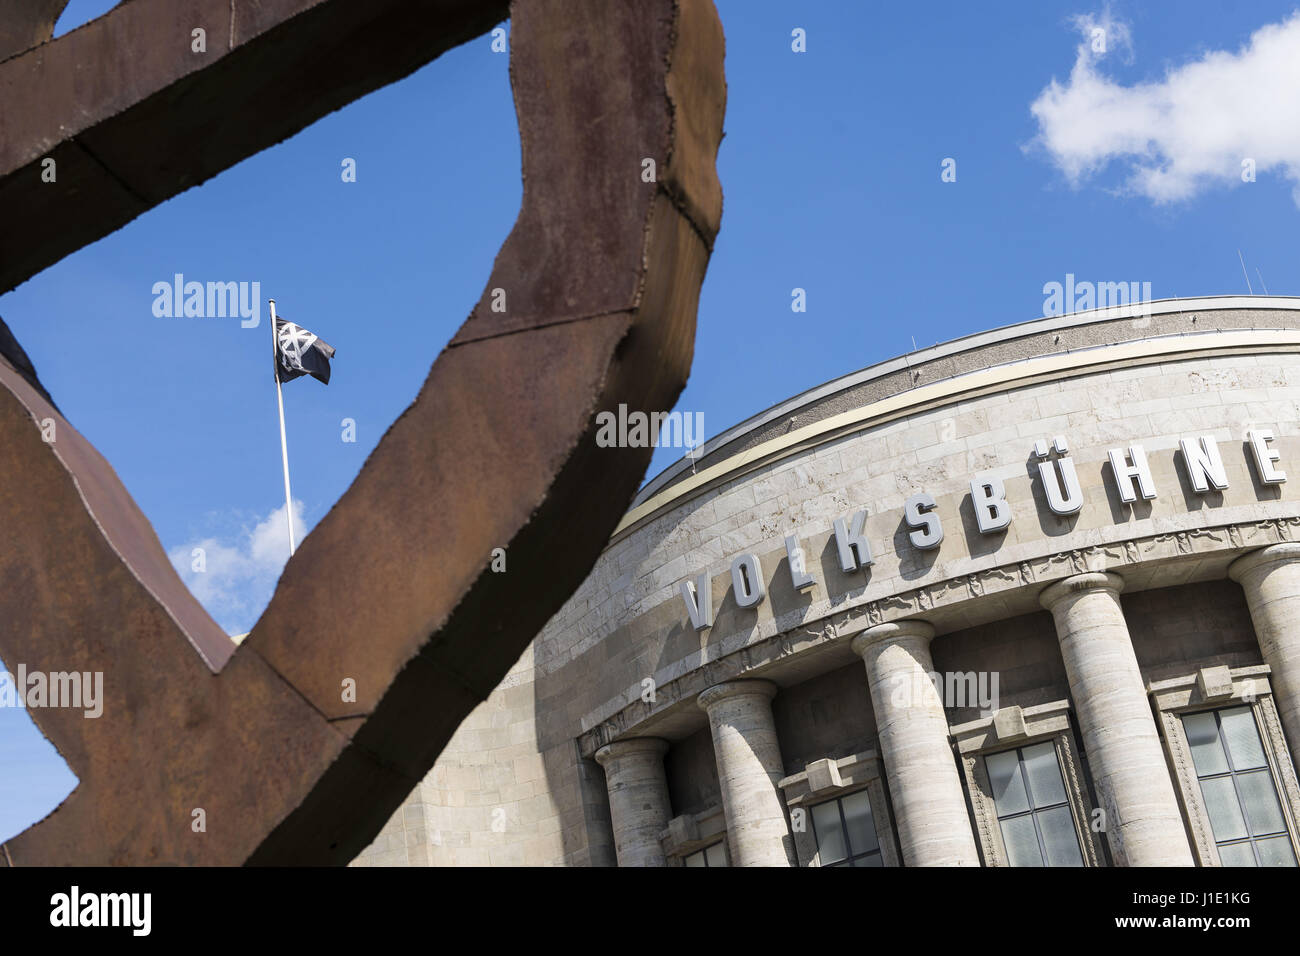 Berlin, Berlin, Germany. 20th Apr, 2017. The steel sculpture 'Laufendes Rad' (English: 'Running Wheel'), designed by RAINER HAUSSMANN in 1994, in front of the main entrance of the Volksbuehne Berlin. The sculpture will be dismantled at the end of the current season in protest against the new director CHRIS DERCON. Credit: Jan Scheunert/ZUMA Wire/Alamy Live News Stock Photo